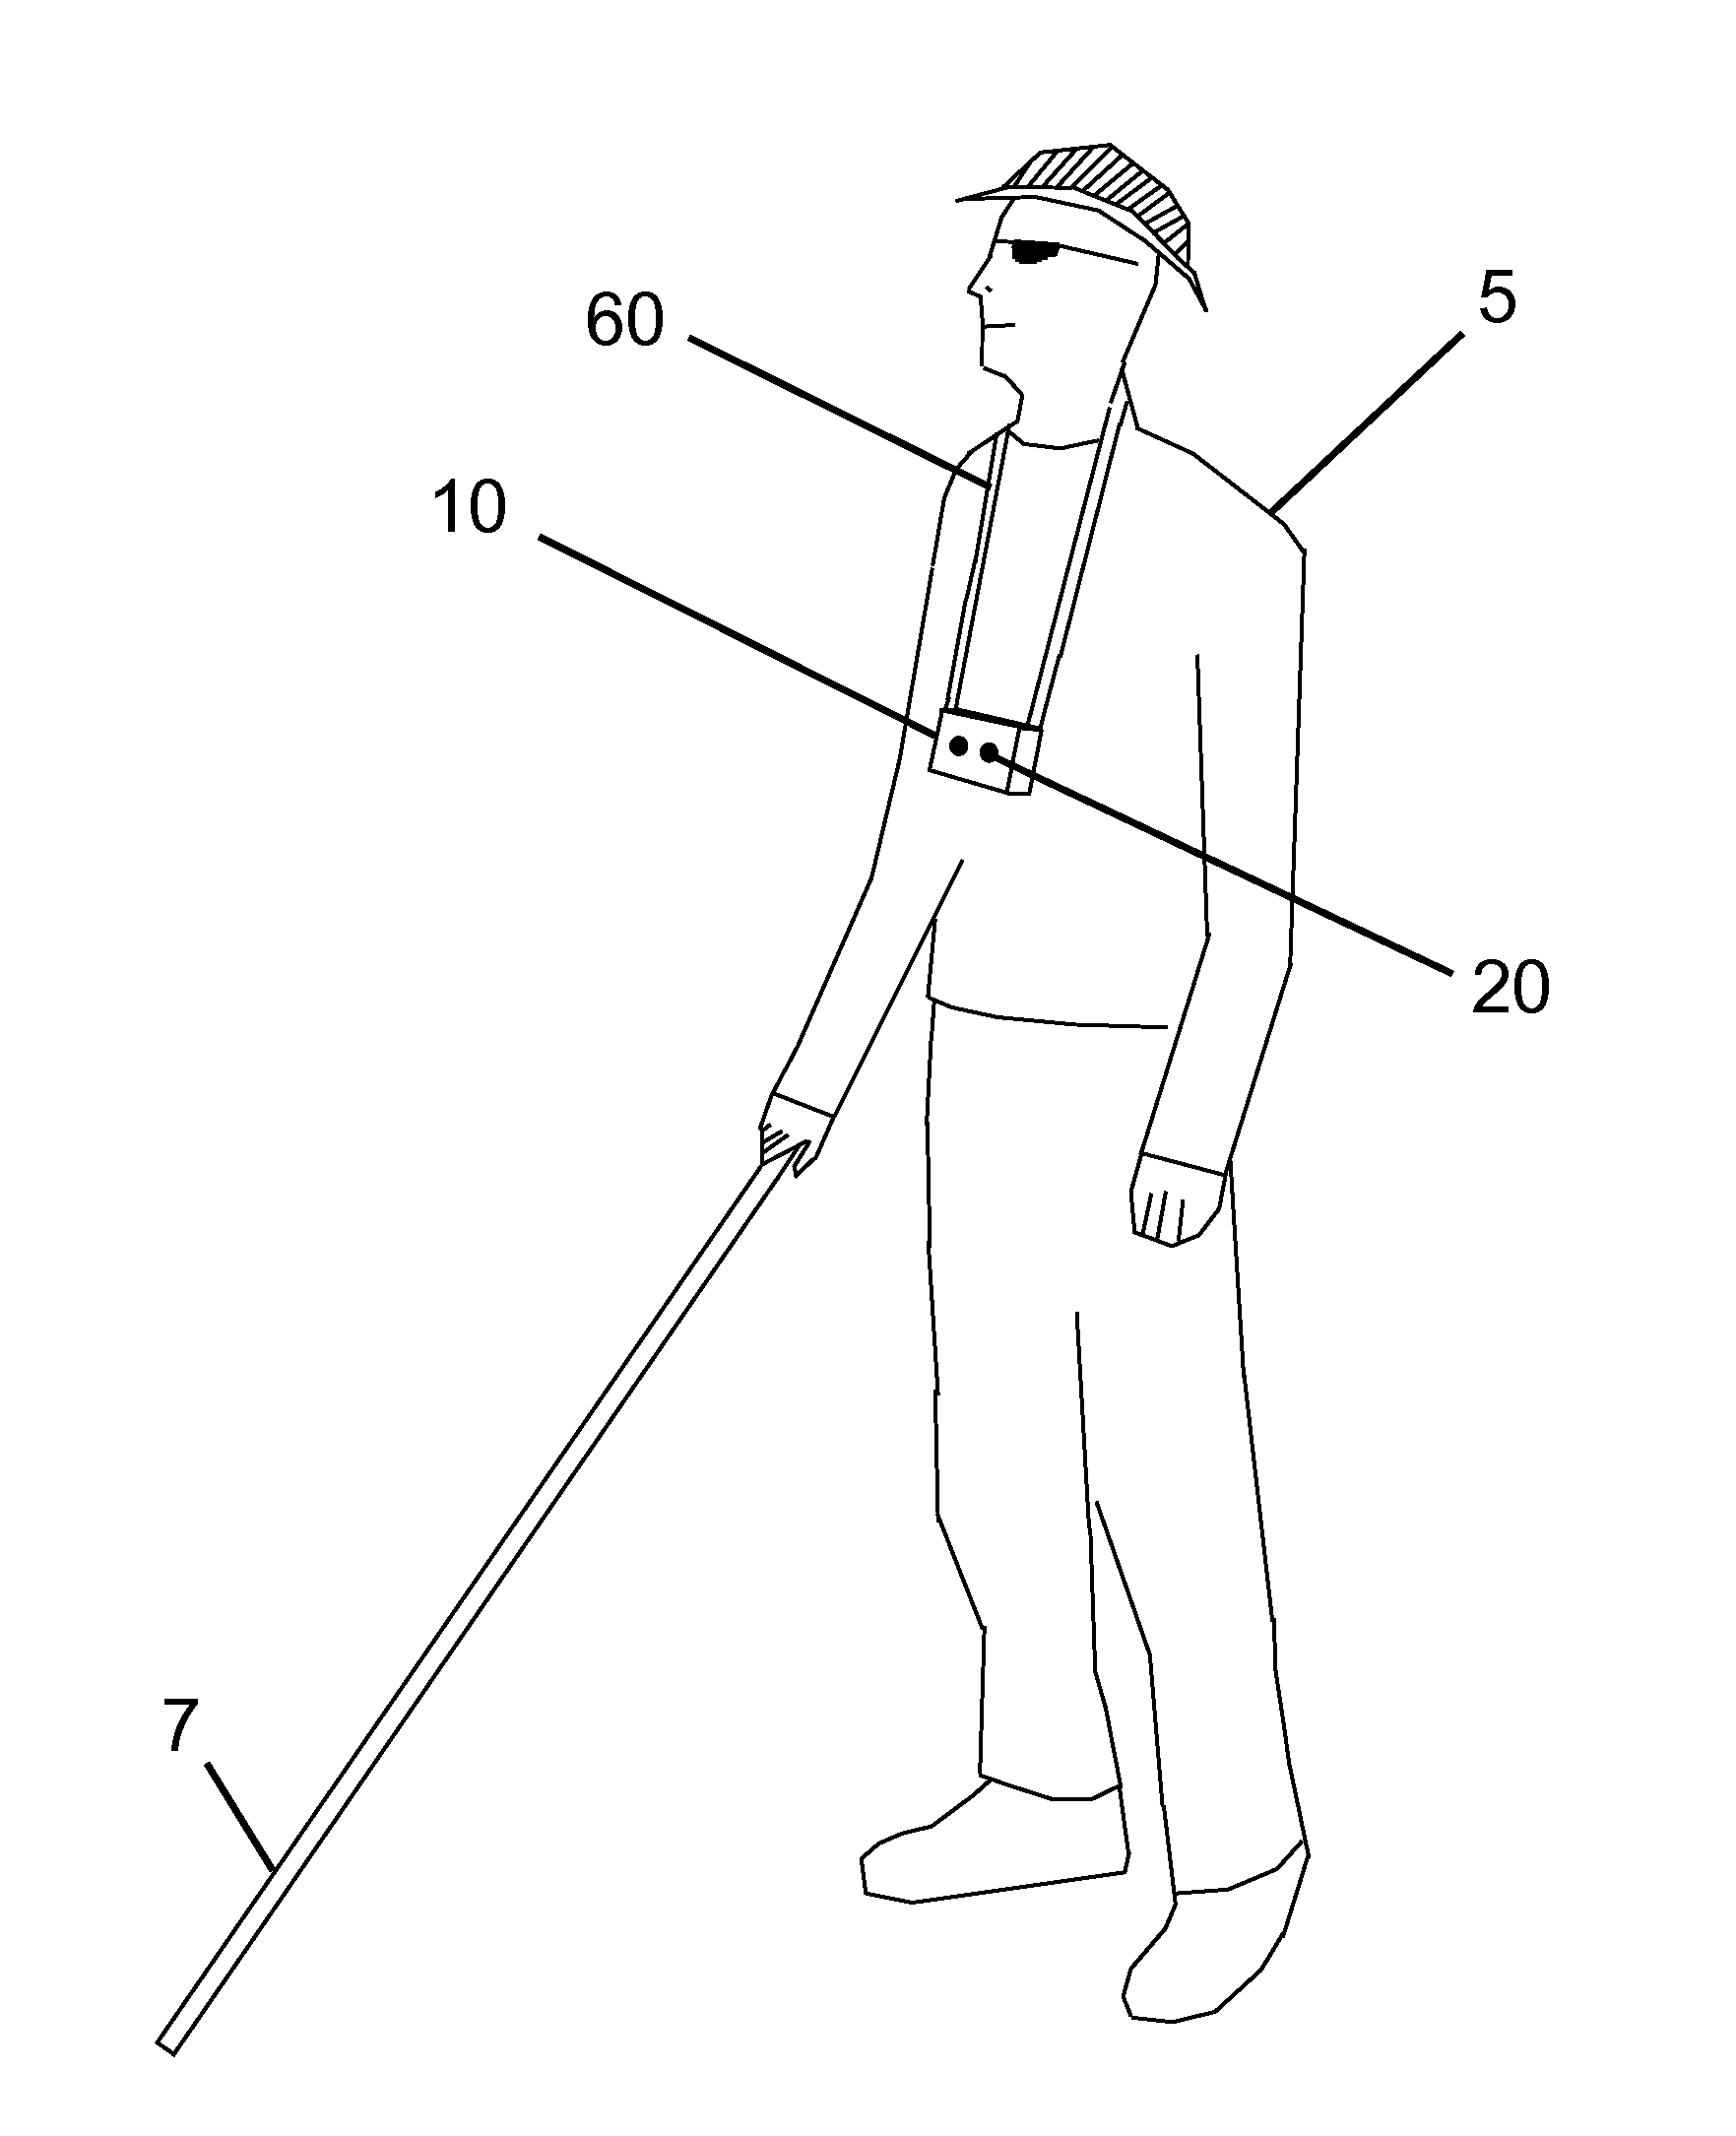 System And Method For Alerting Visually Impaired Users Of Nearby Objects